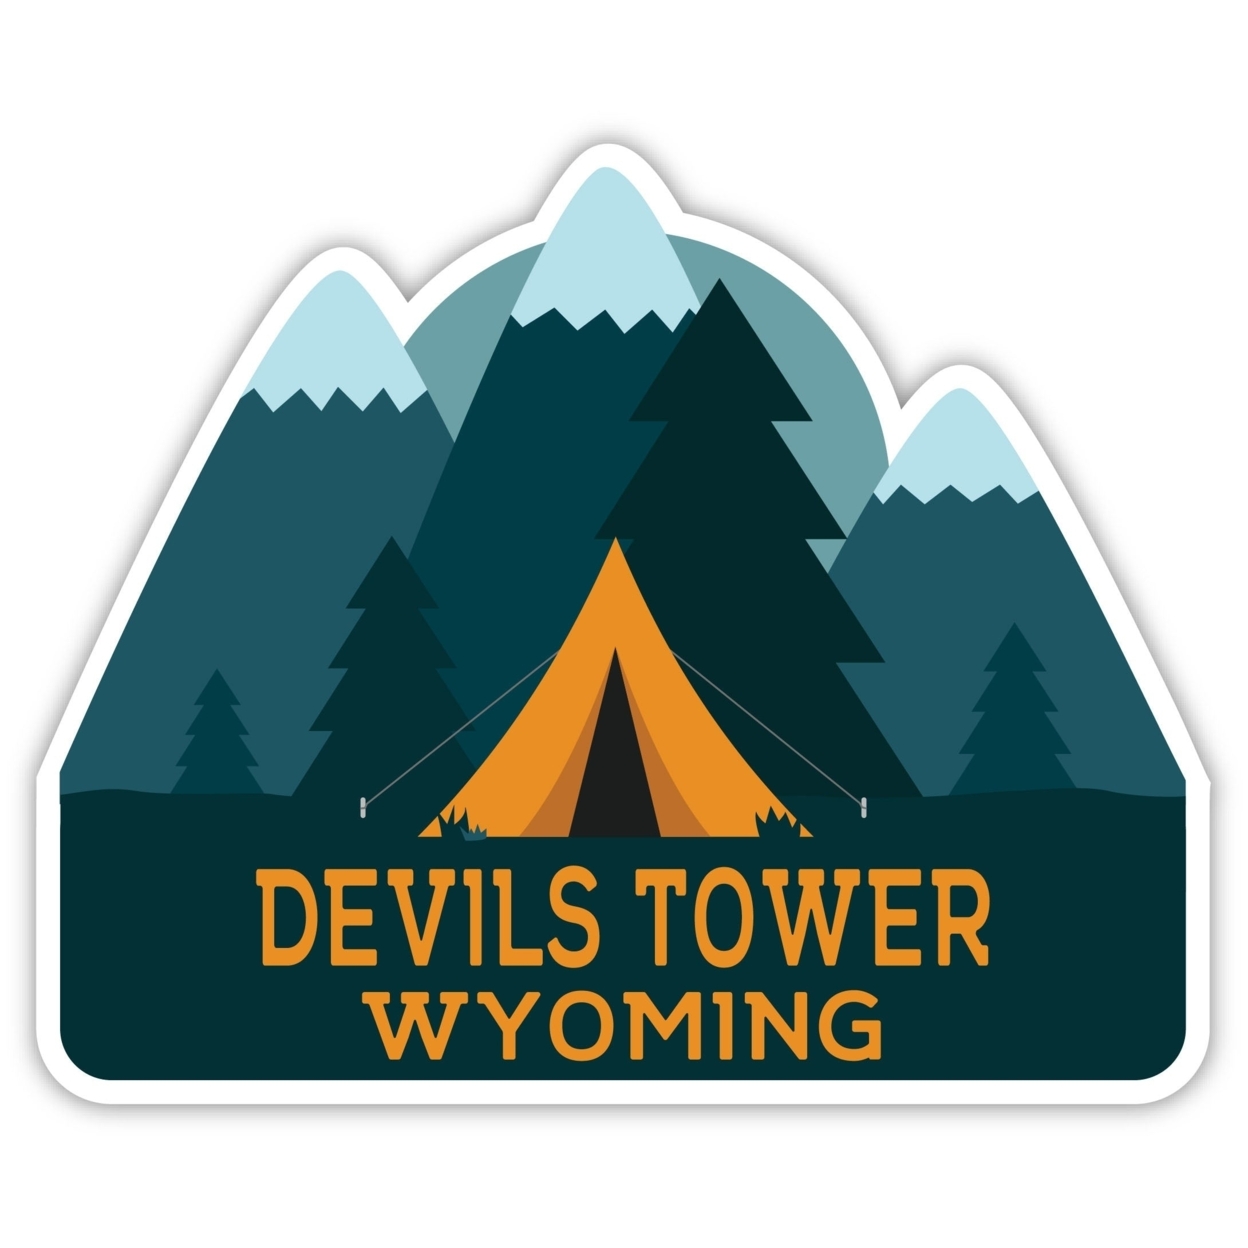 Devils Tower Wyoming Souvenir Decorative Stickers (Choose Theme And Size) - Single Unit, 4-Inch, Bear